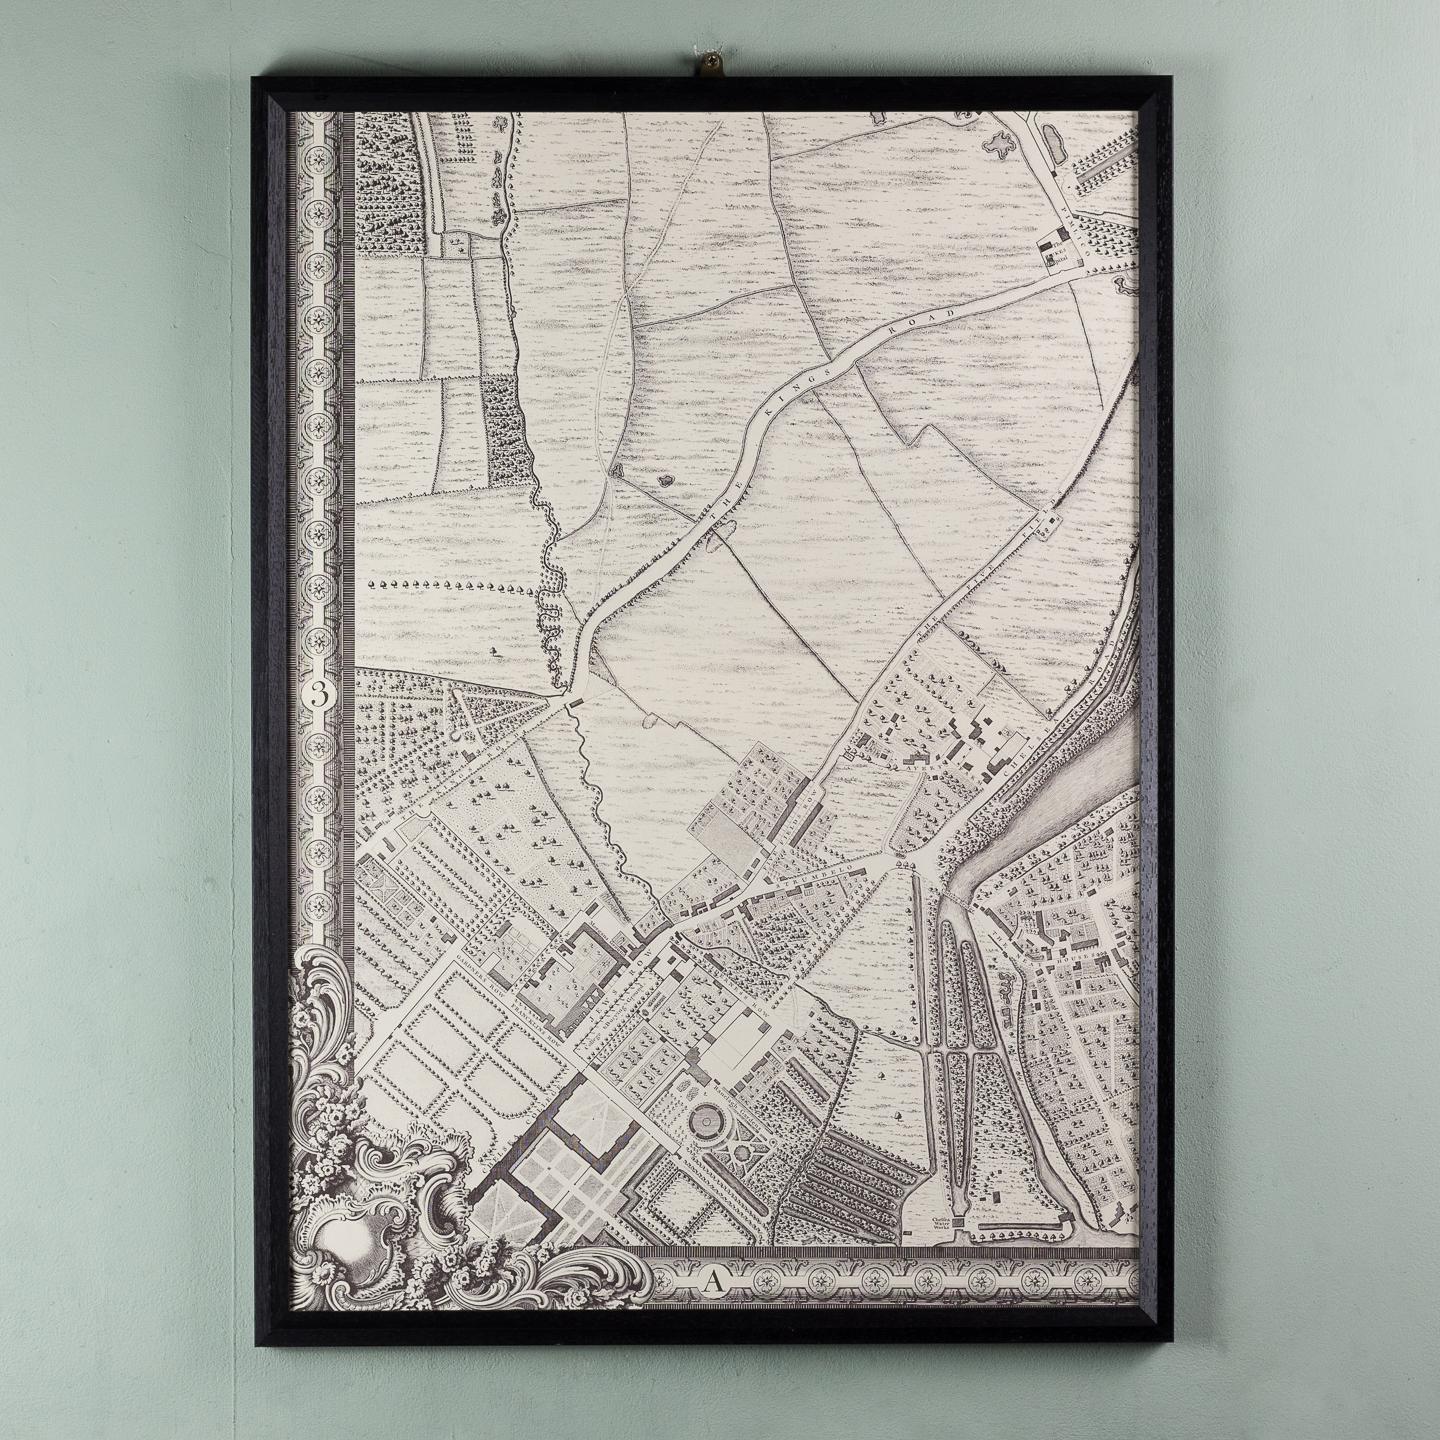 Huge John Rocque Map of London 1746, Republished By Harry Margary 9